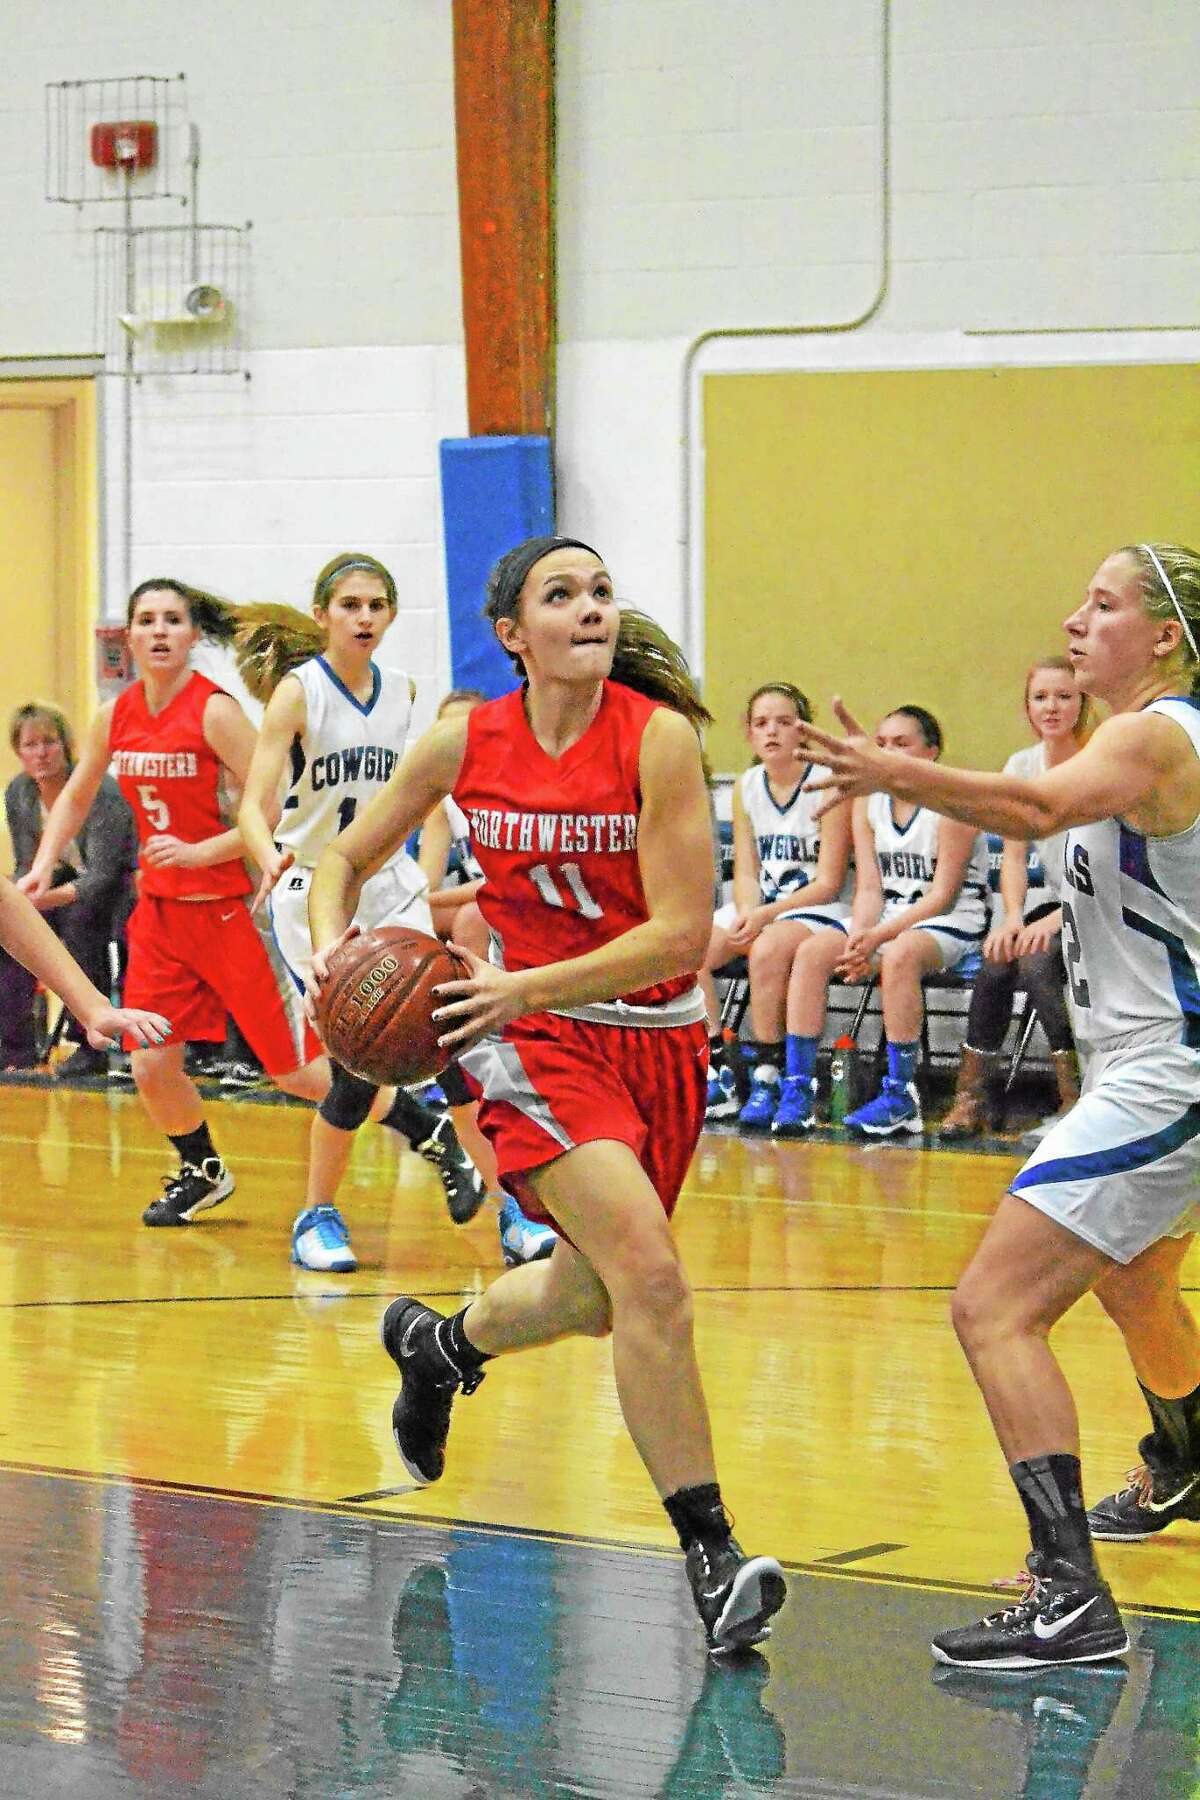 Northwestern’s Emma Beltrandi drives to the basket to score two of her game high 20 points in the Highlanders 33-16 win over Litchfield.